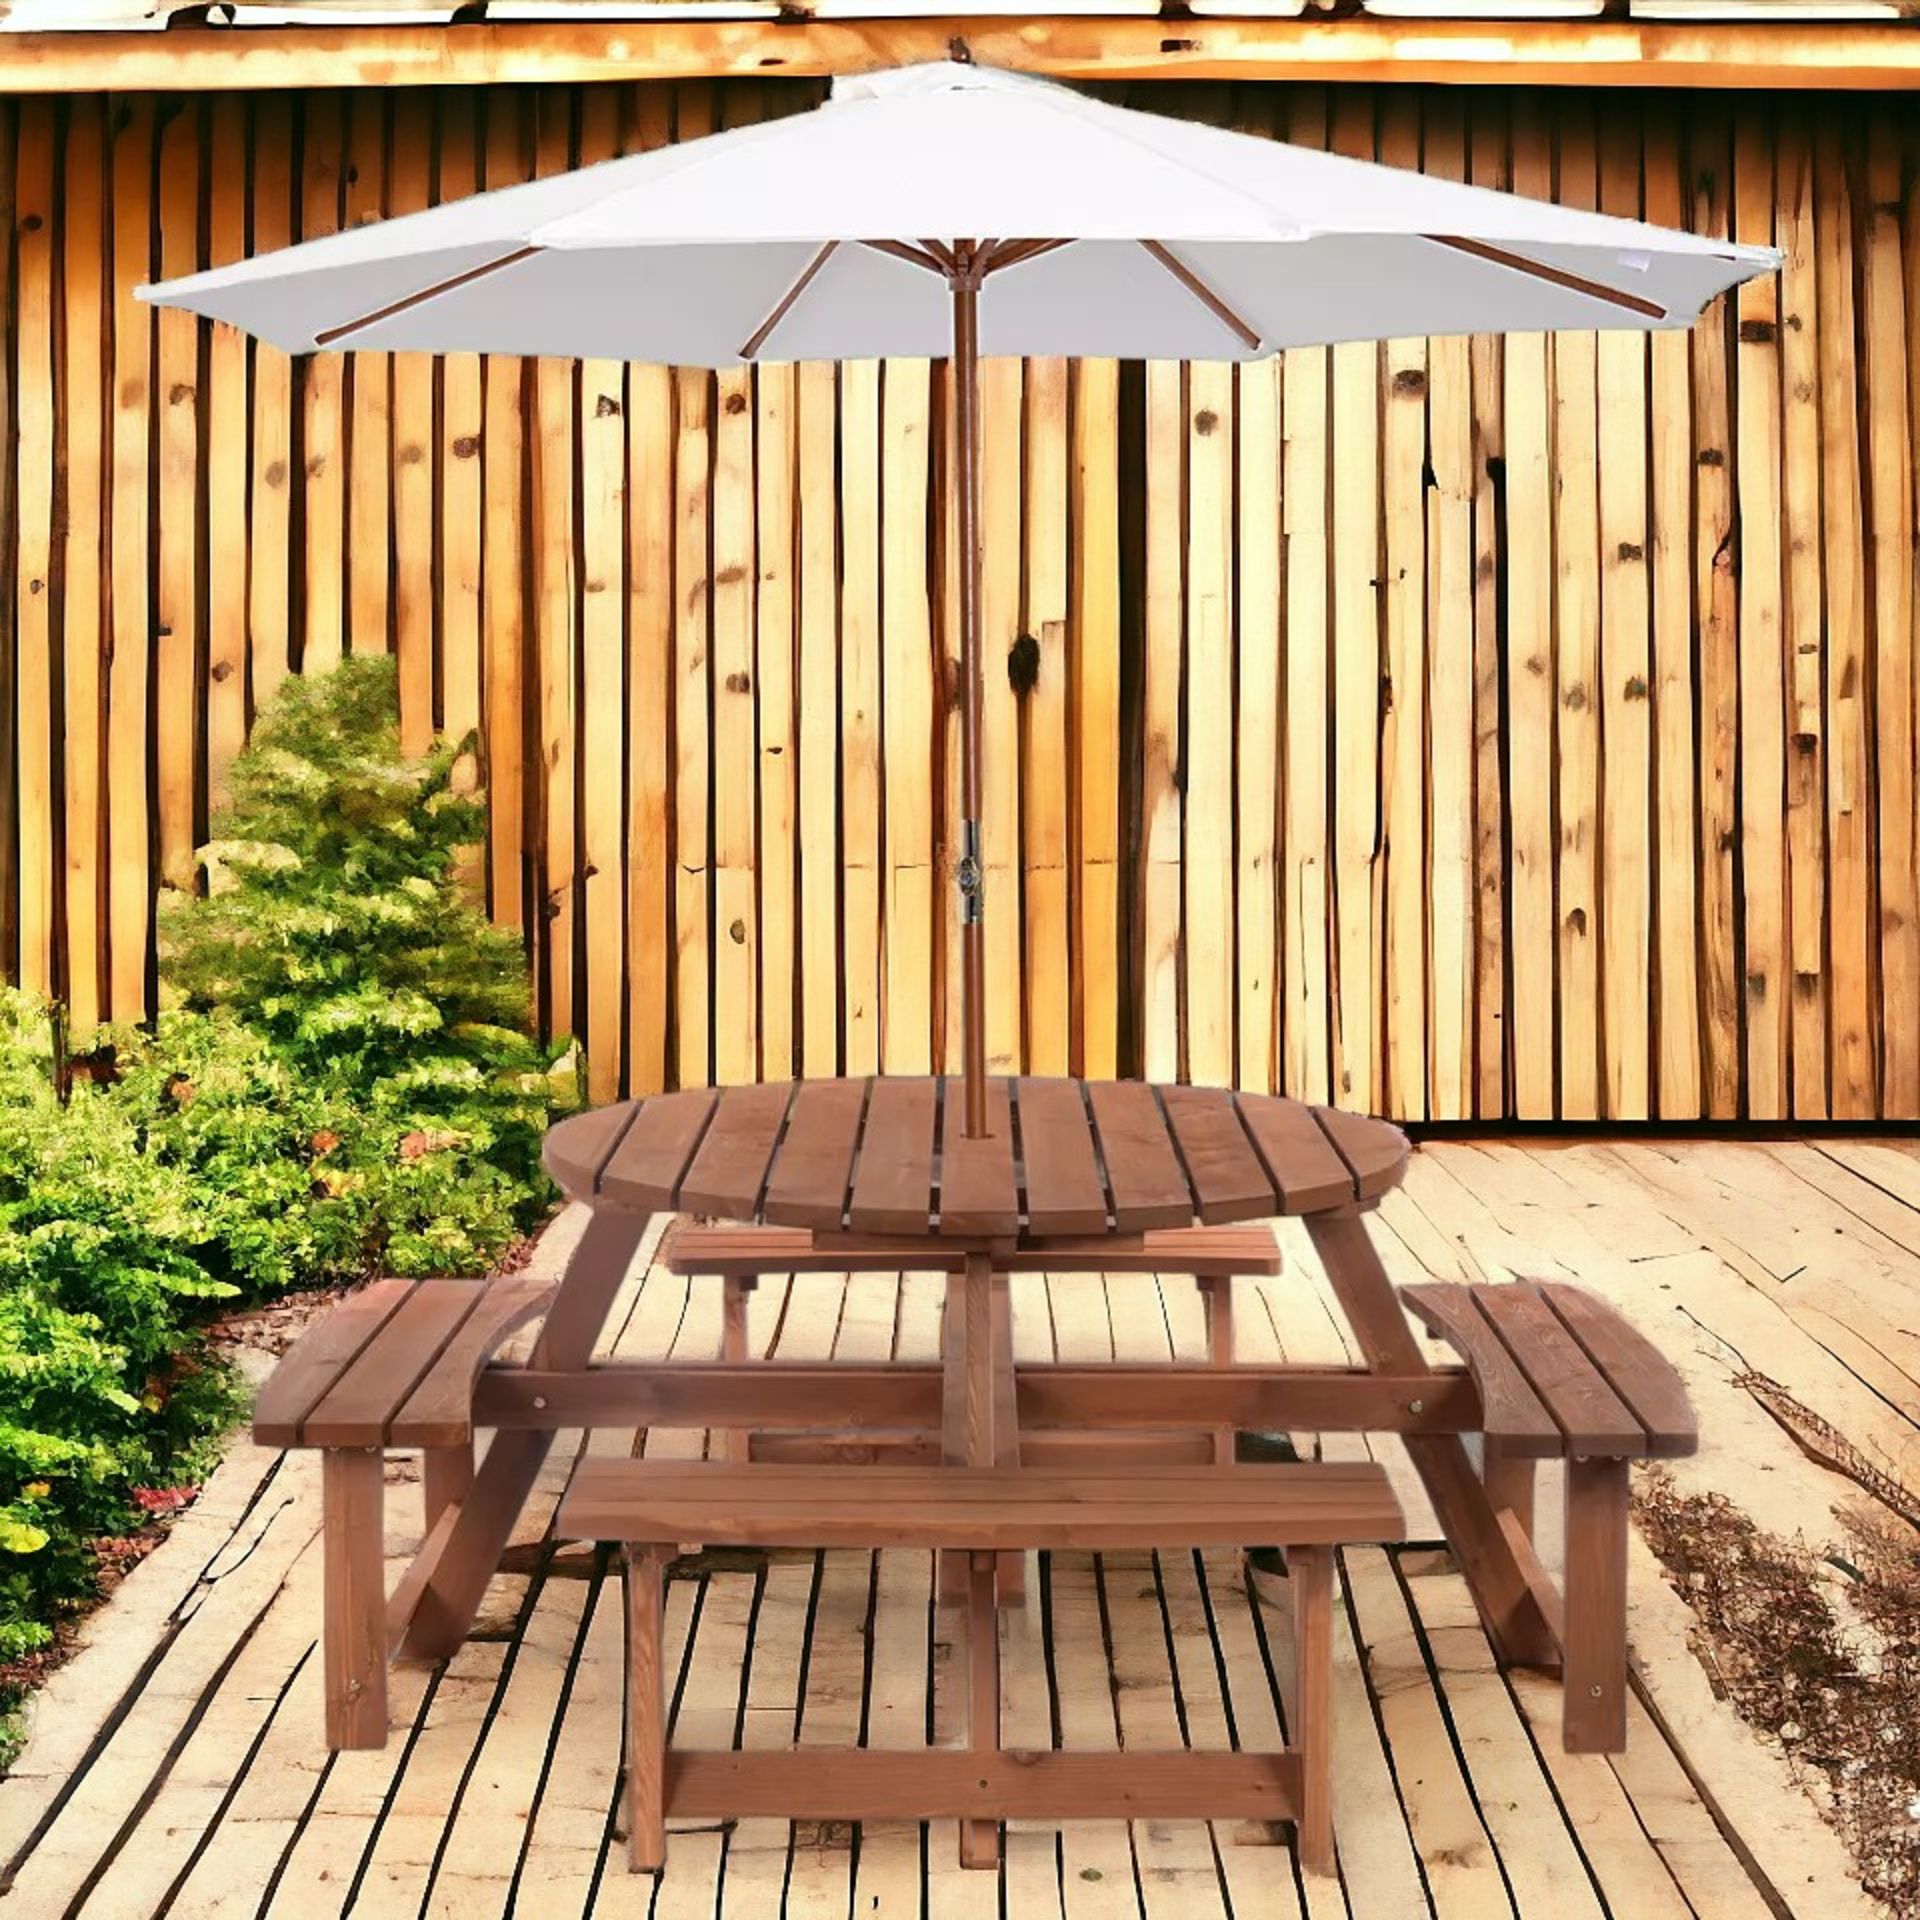 FREE DELIVERY- BRAND NEW 8 SEAT GARDEN OUTDOOR WOODEN ROUND PICNIC TABLE BENCH